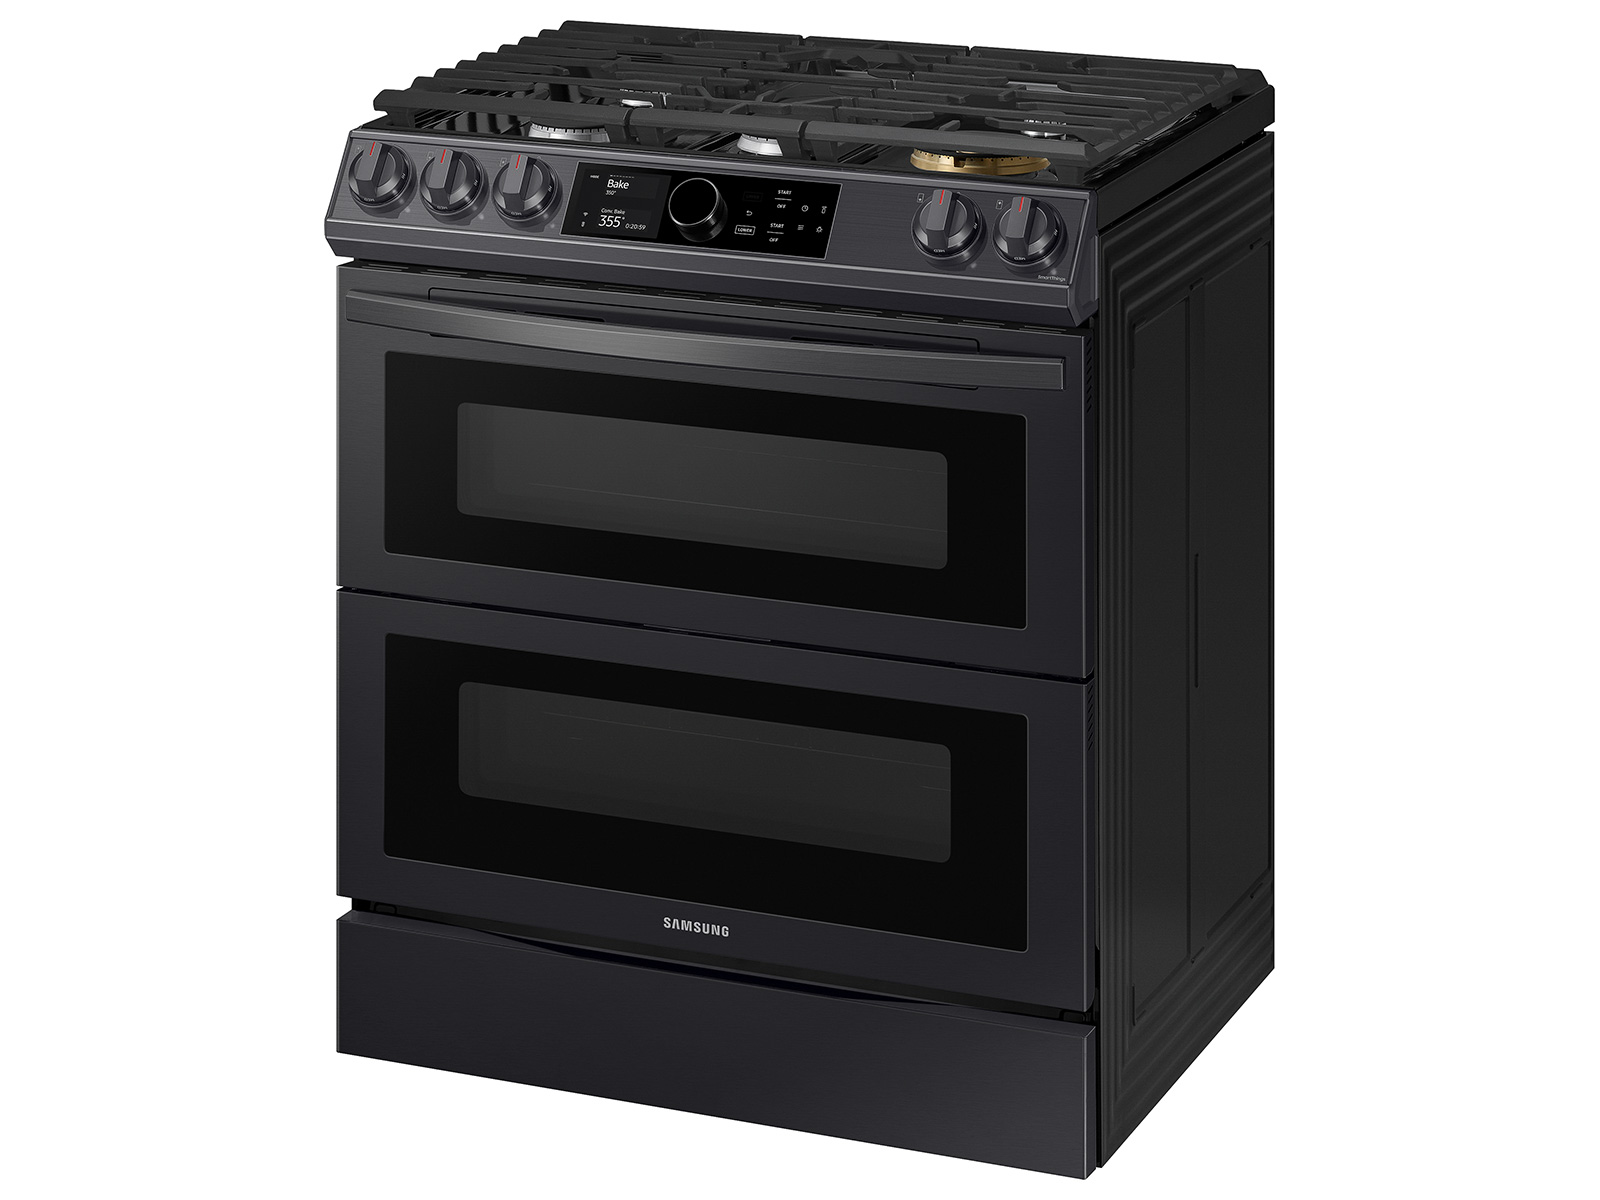 Samsung 6.3 Cu. Ft. Slide-In Dual Fuel Range with Smart Dial in